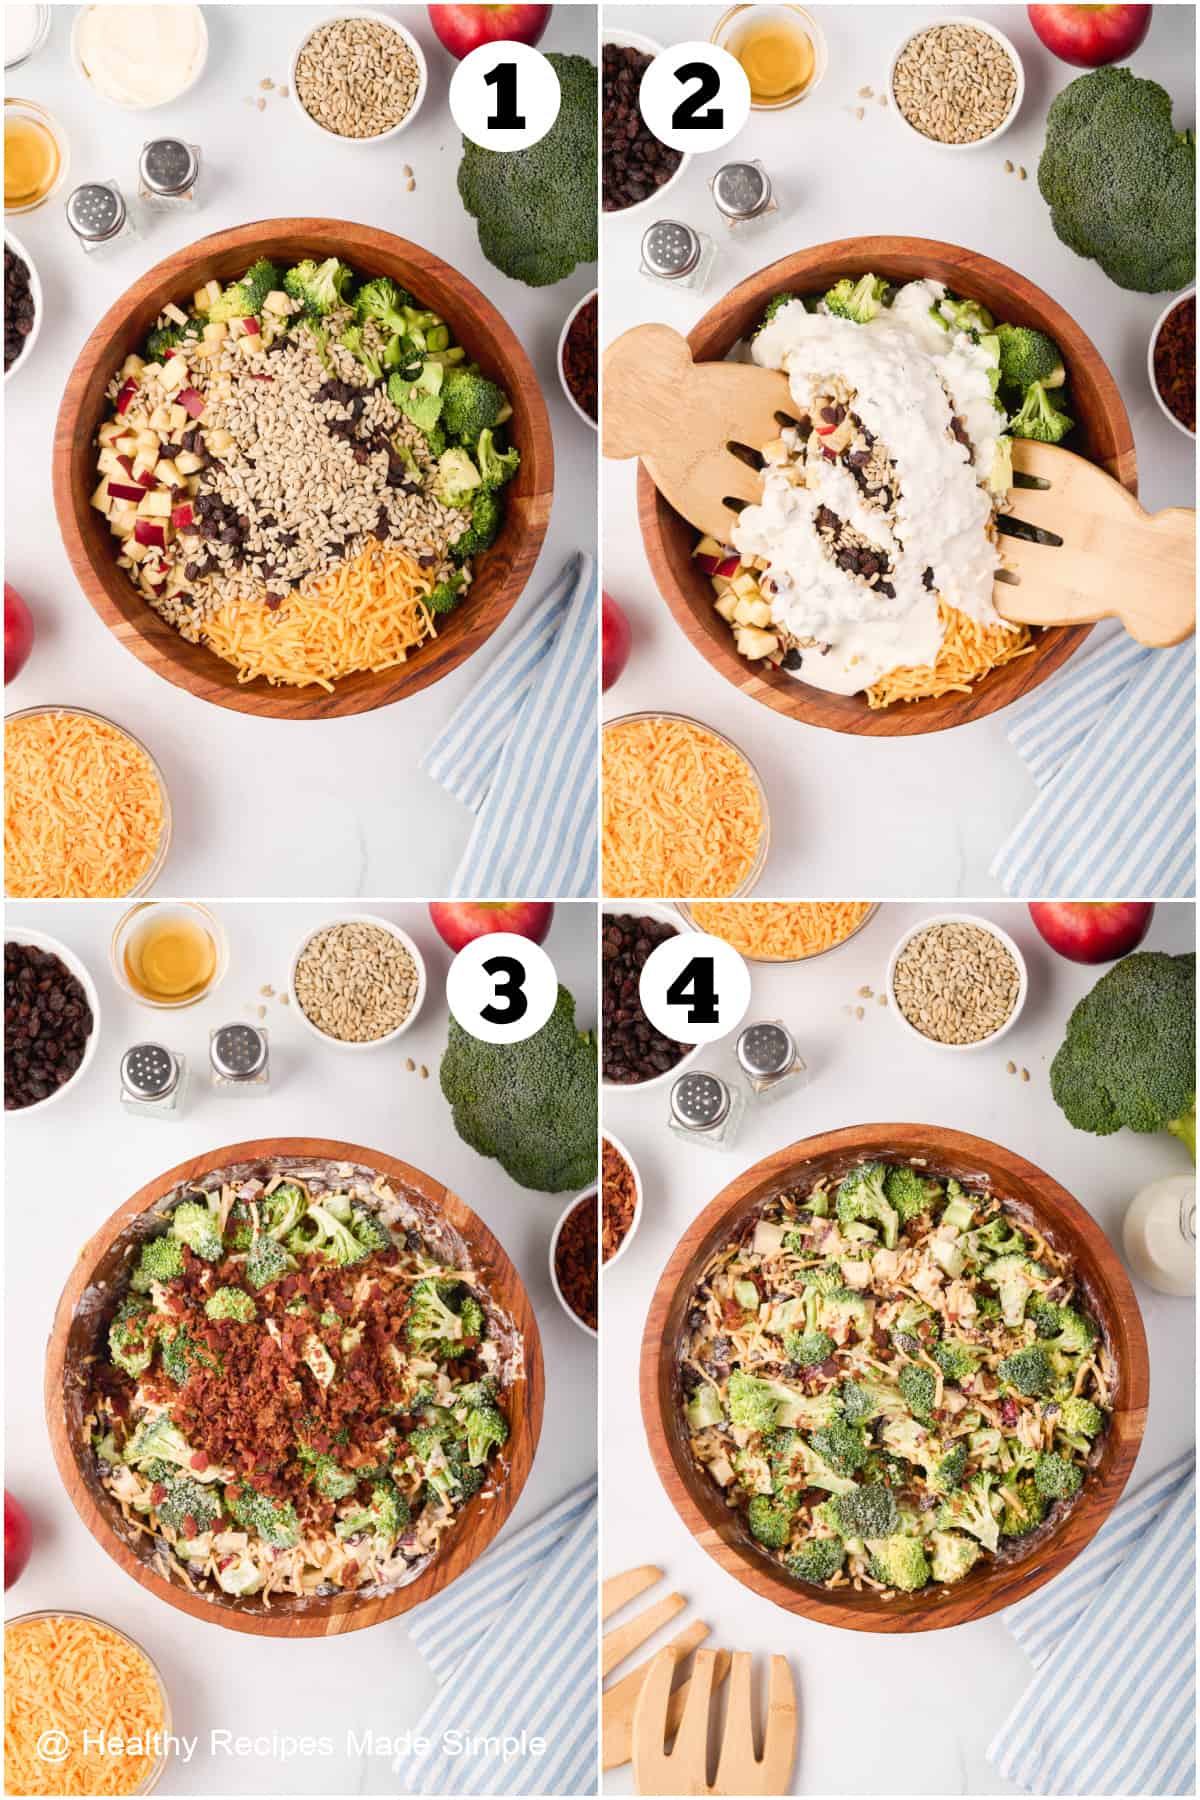 4 pictures showing how to make broccoli crunch salad.